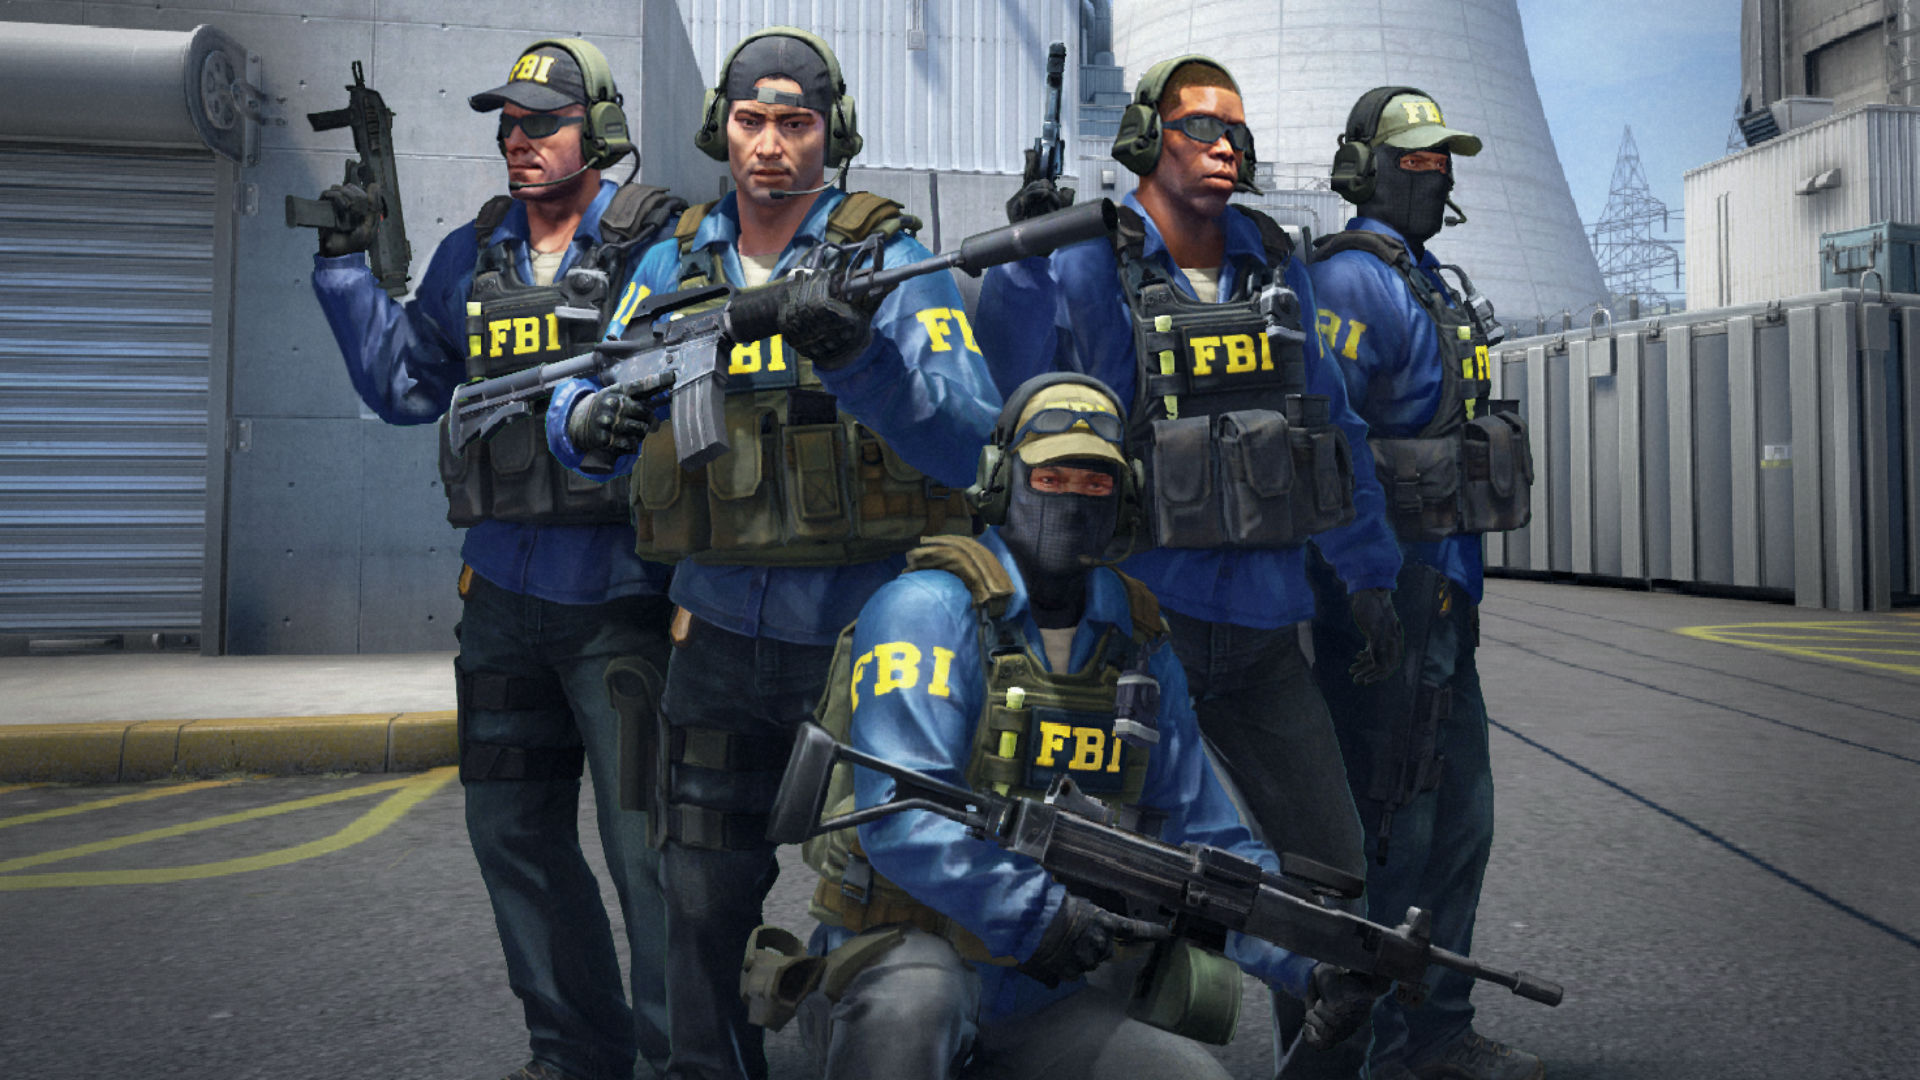 Counter Strike: Global Offensive breaks another record on Steam